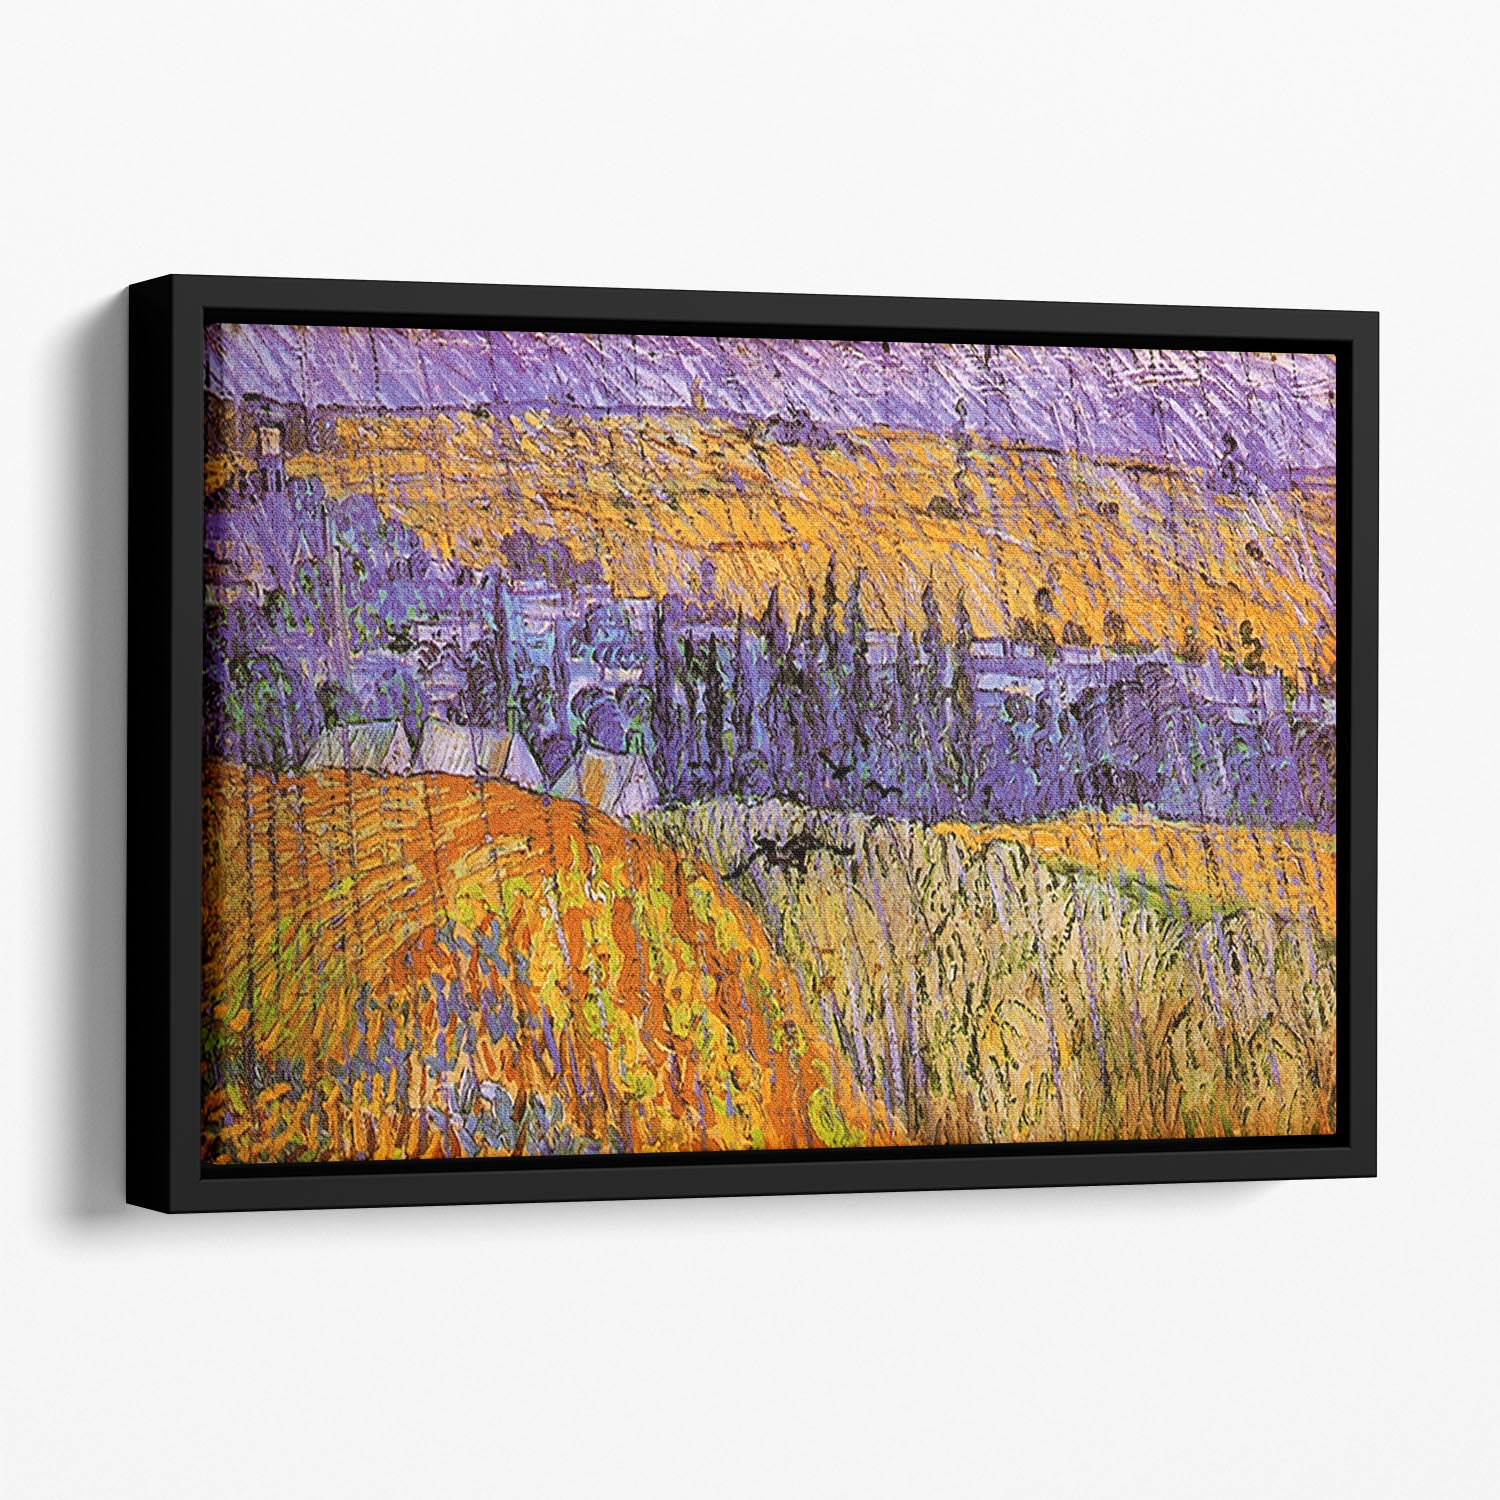 Landscape at Auvers in the Rain by Van Gogh Floating Framed Canvas